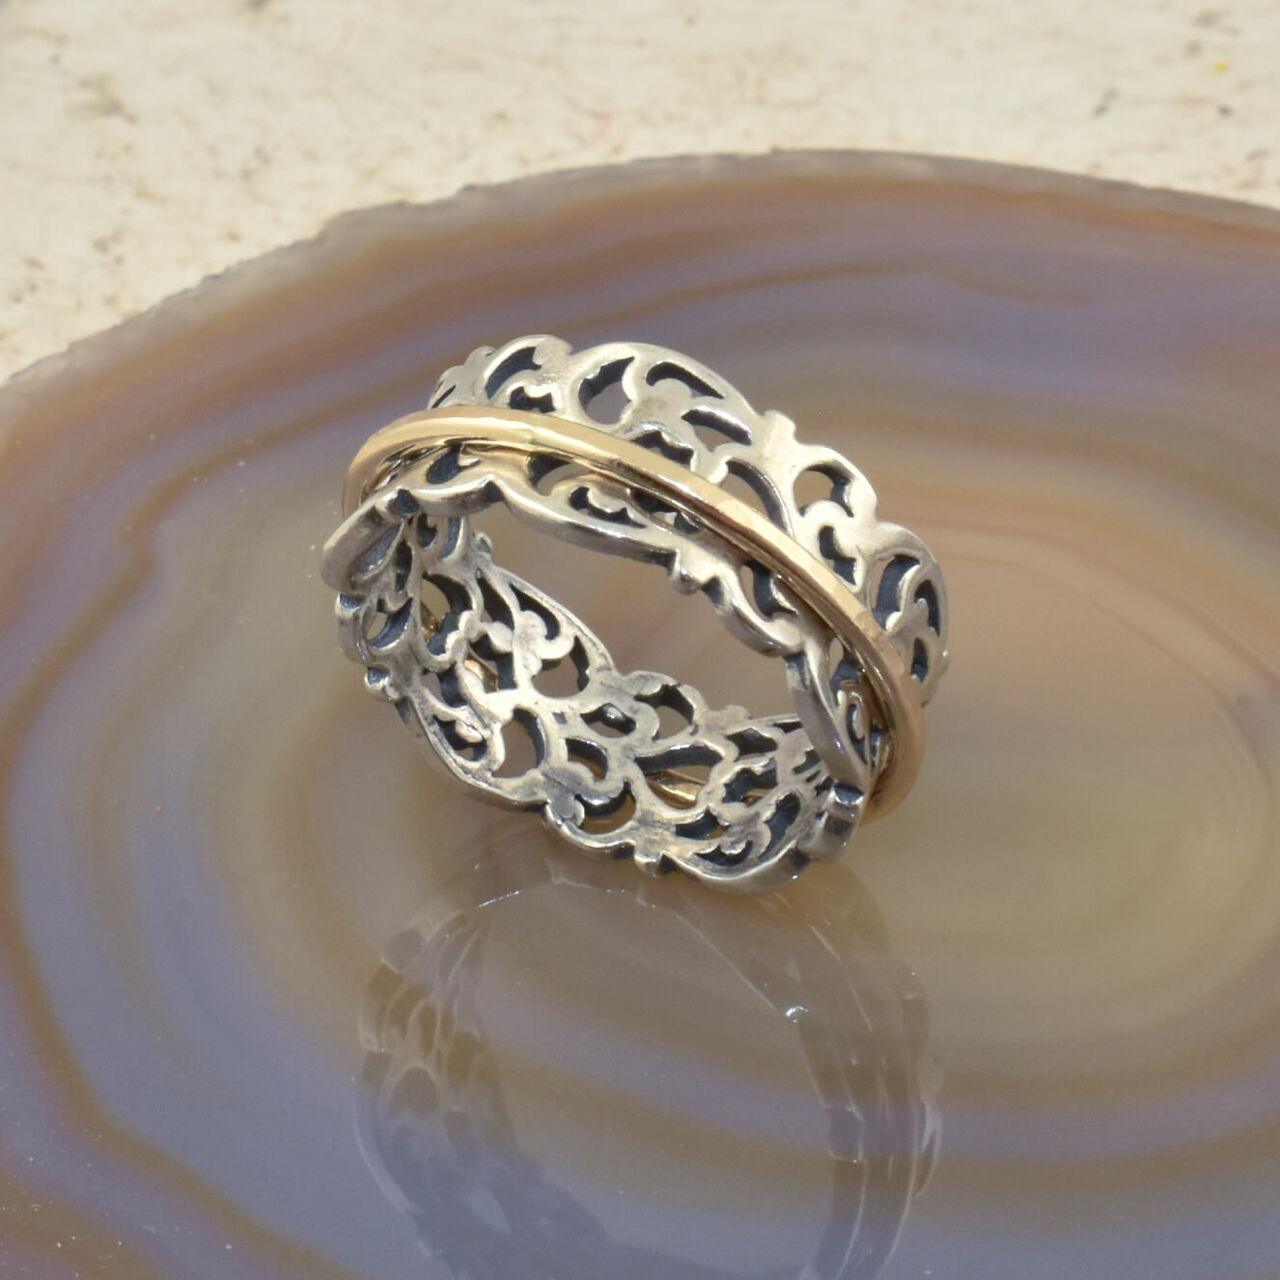 Handcrafted sterling silver ring with a gold filled spinner